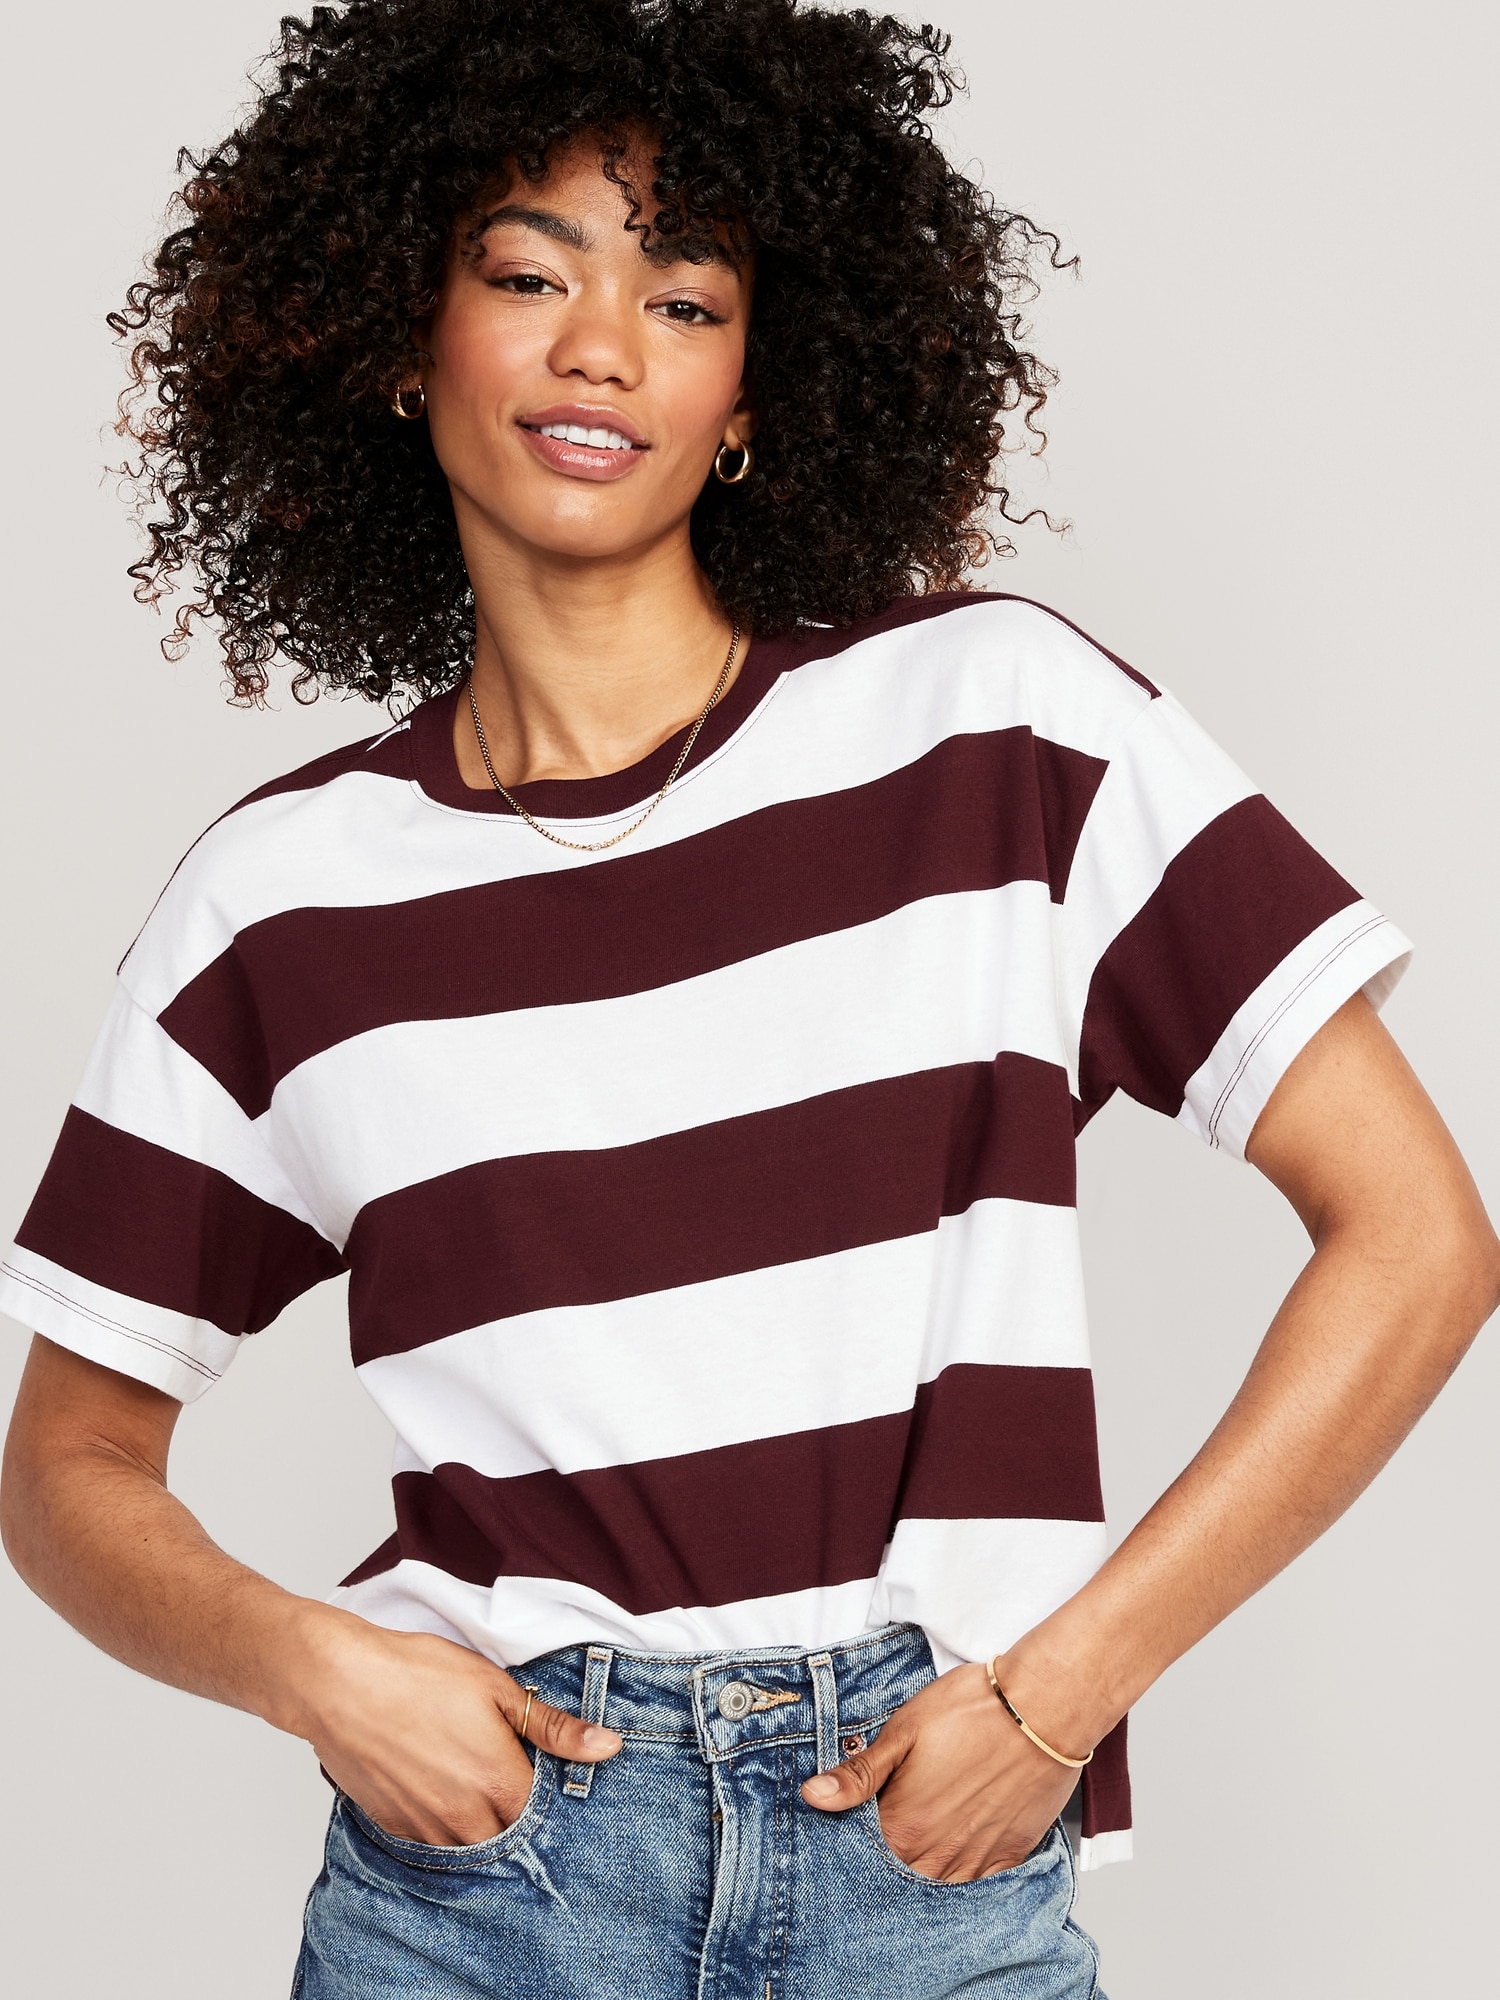 Vintage Striped T-Shirt for Women Navy